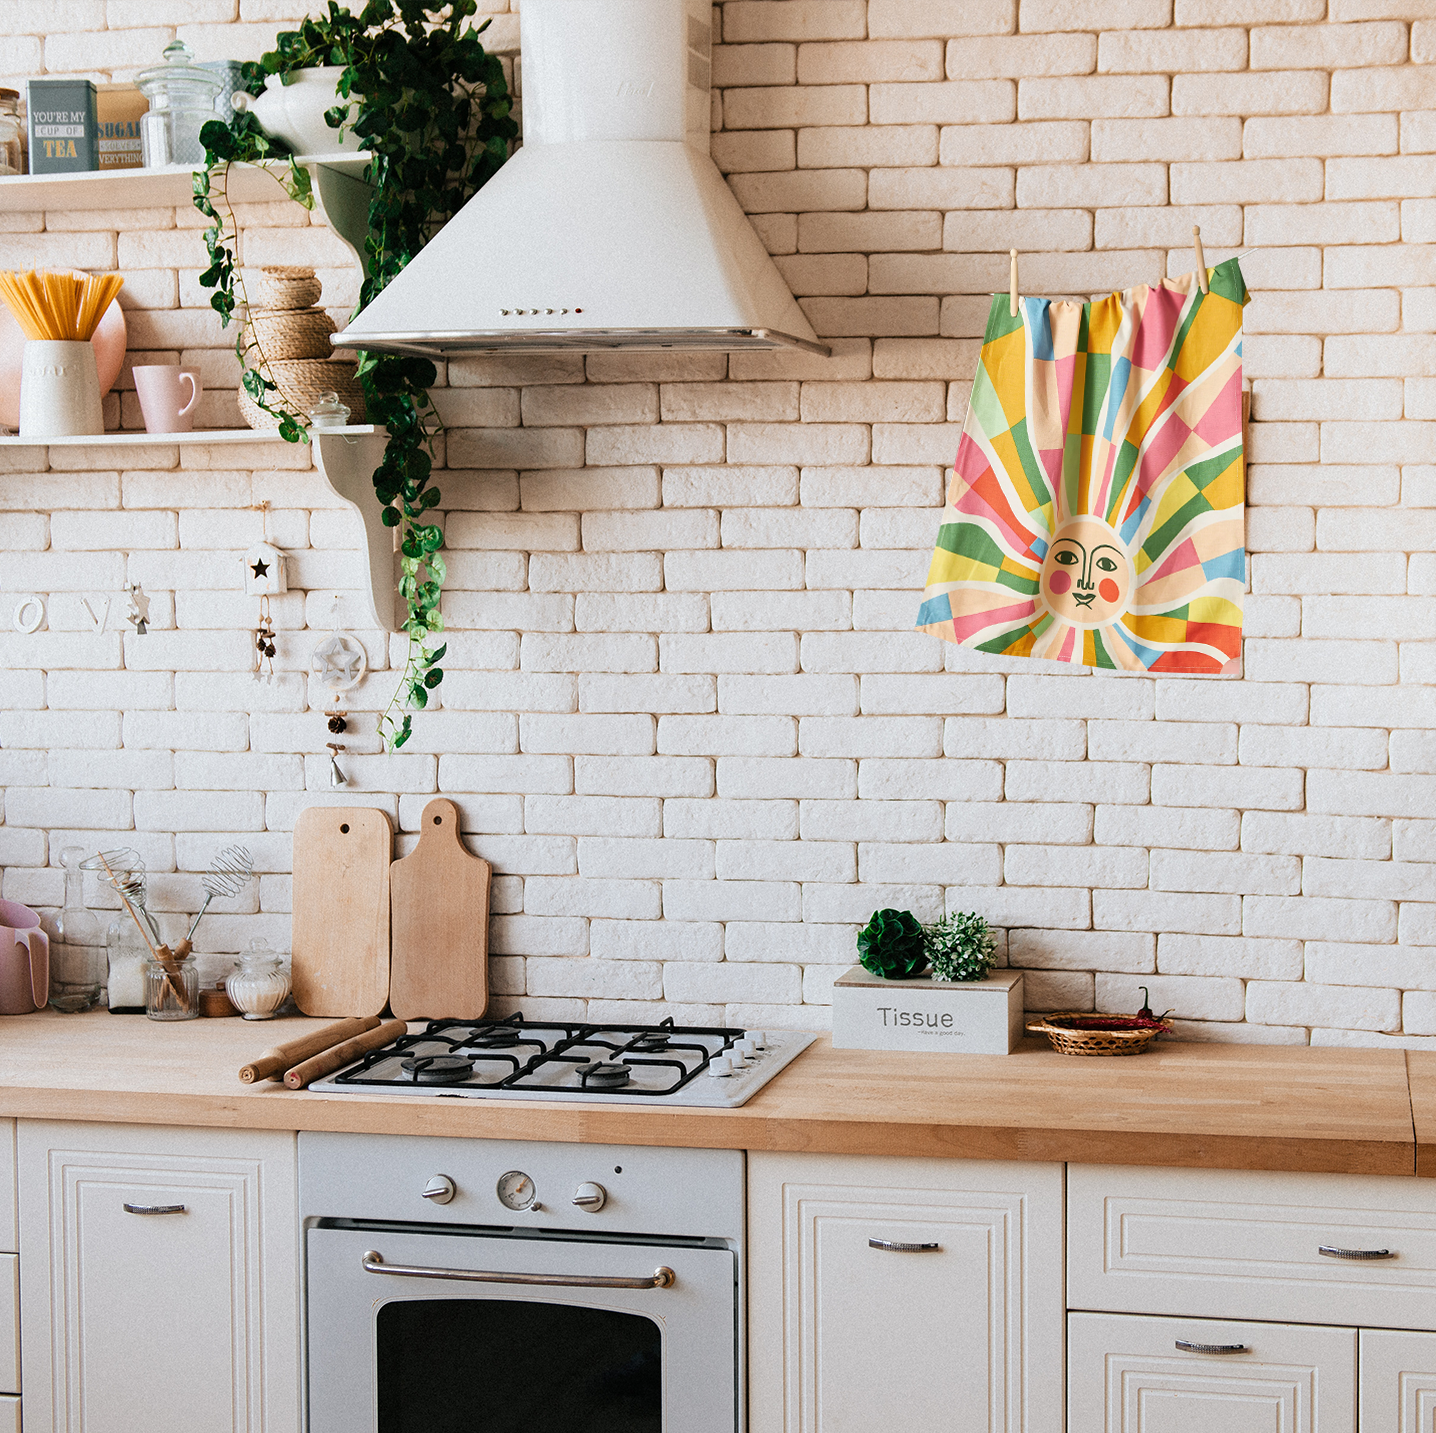 Redoing Your Kitchen? Here Are the Top 2023 Trends to Look Out For